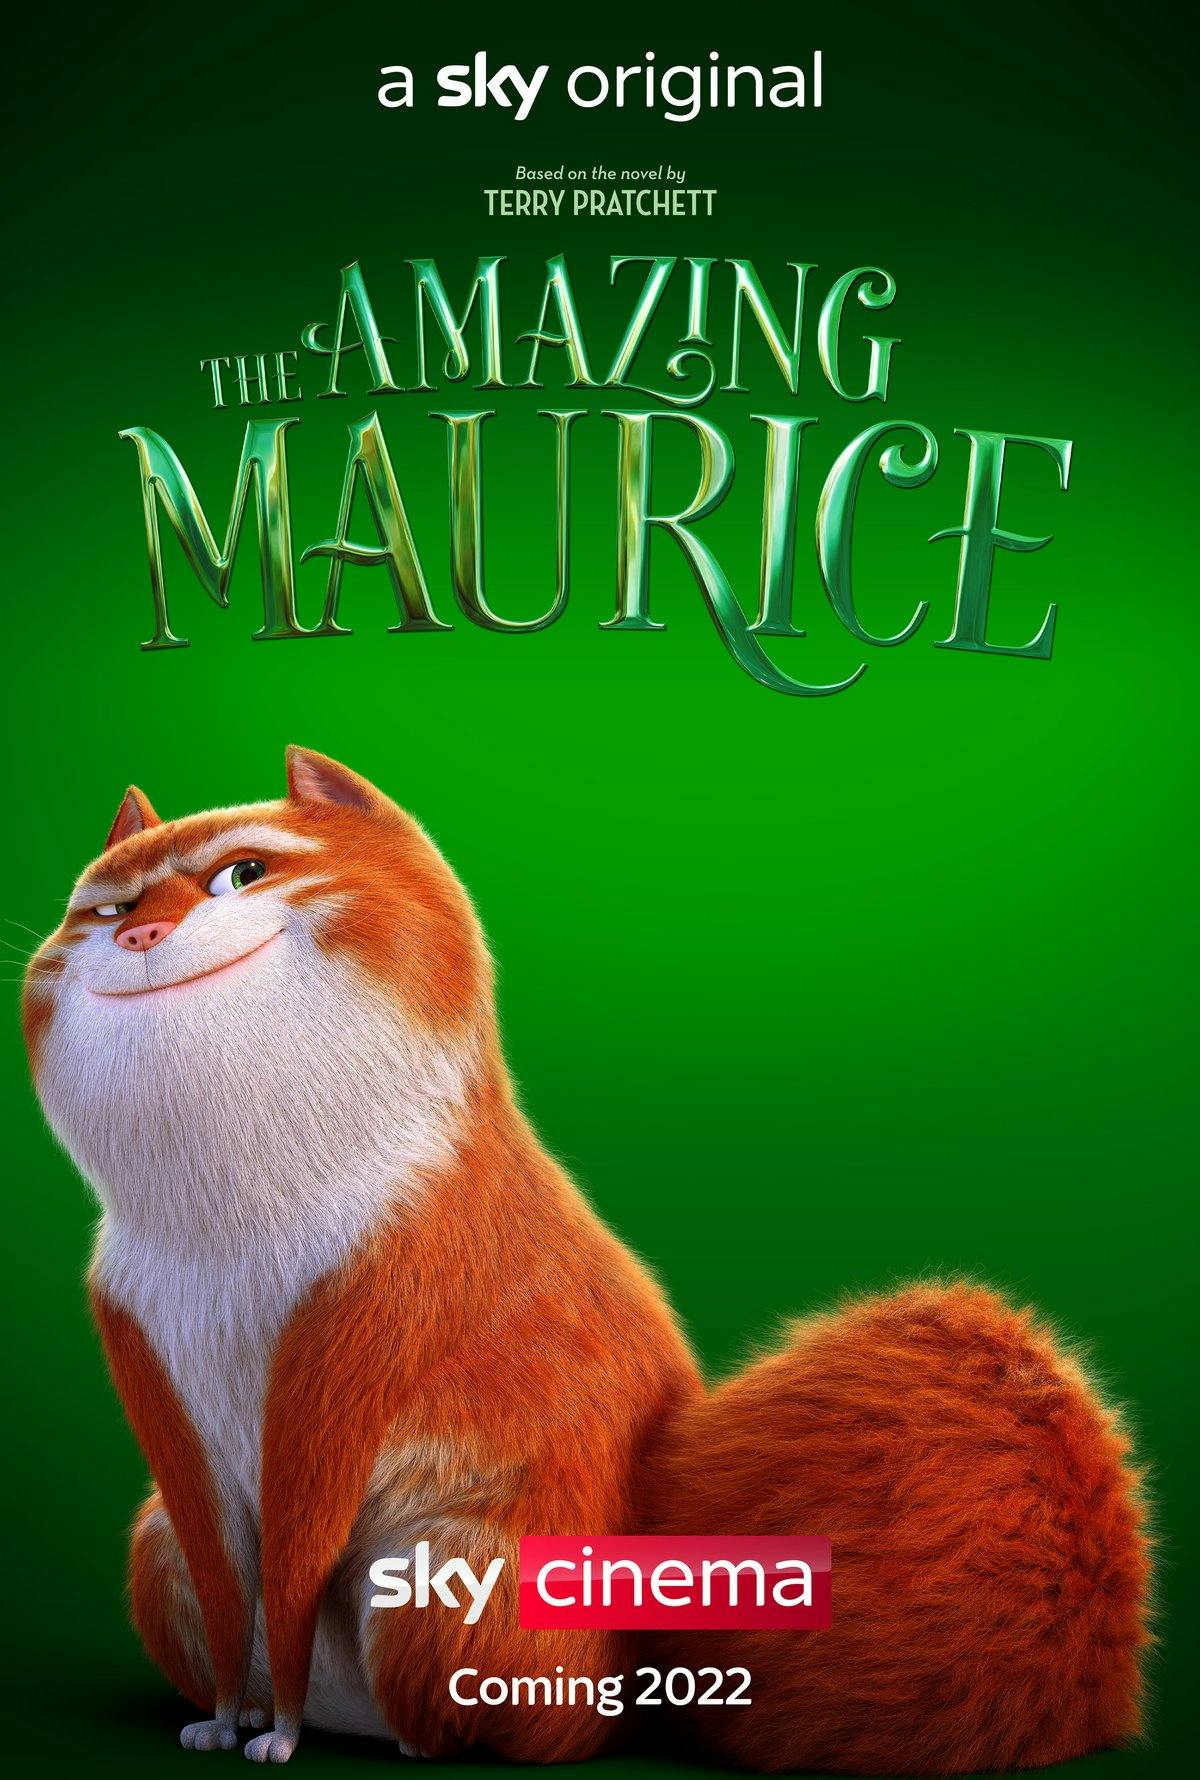 download maurice and the amazing rodents